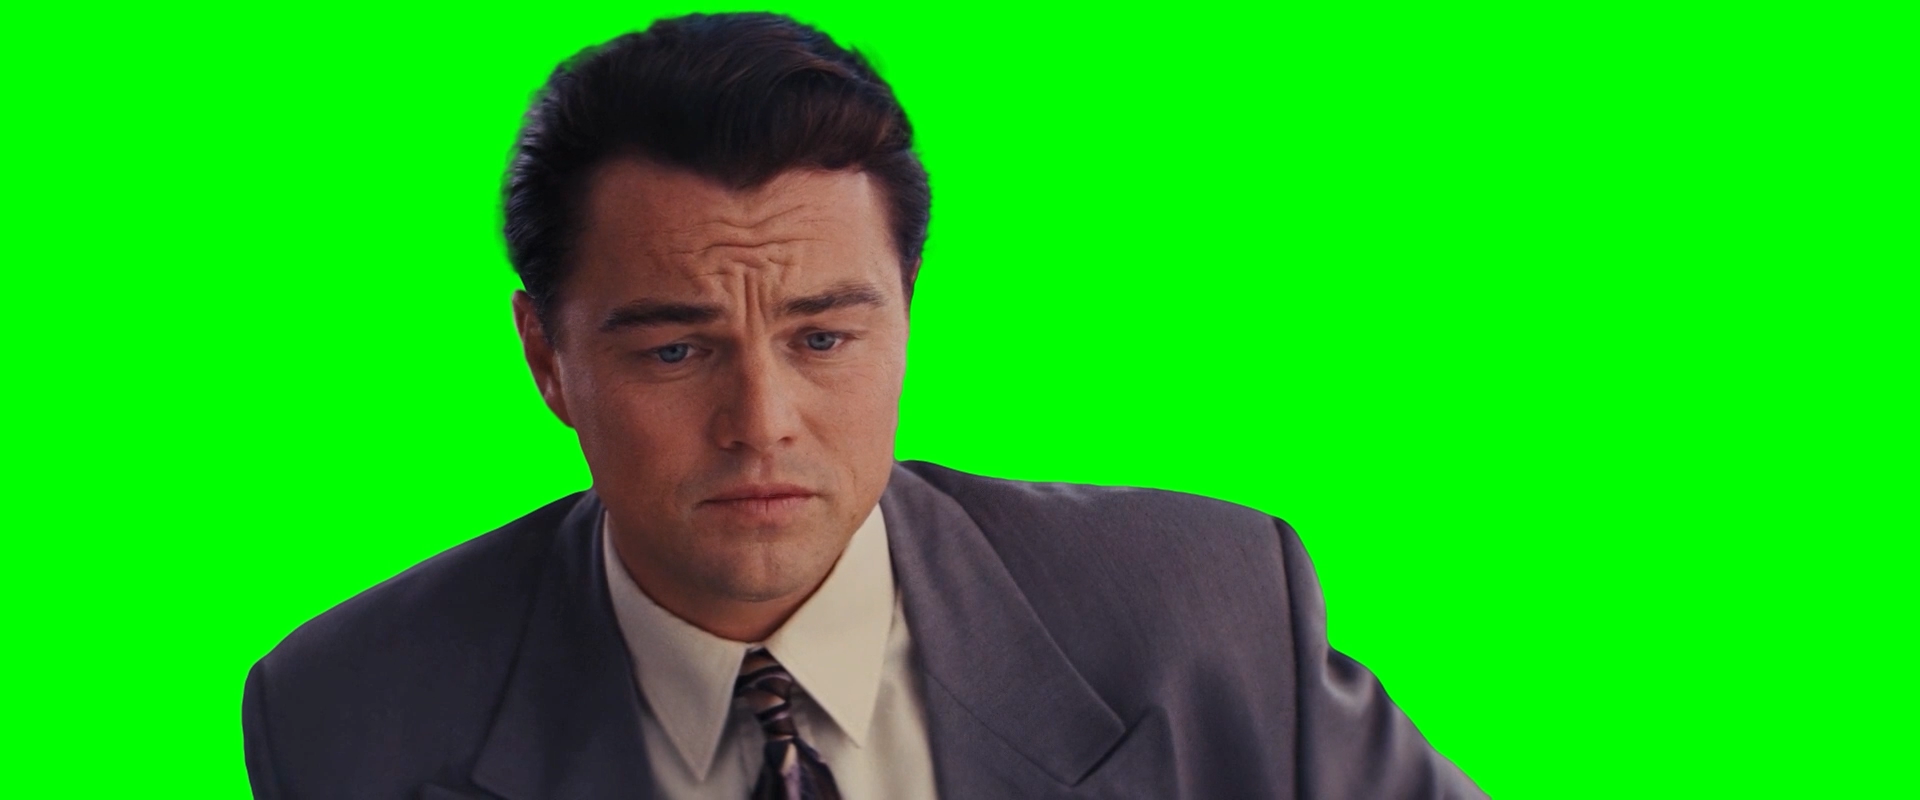 You gotta pump those numbers up, those are rookie numbers - The Wolf of Wall Street (Green Screen)